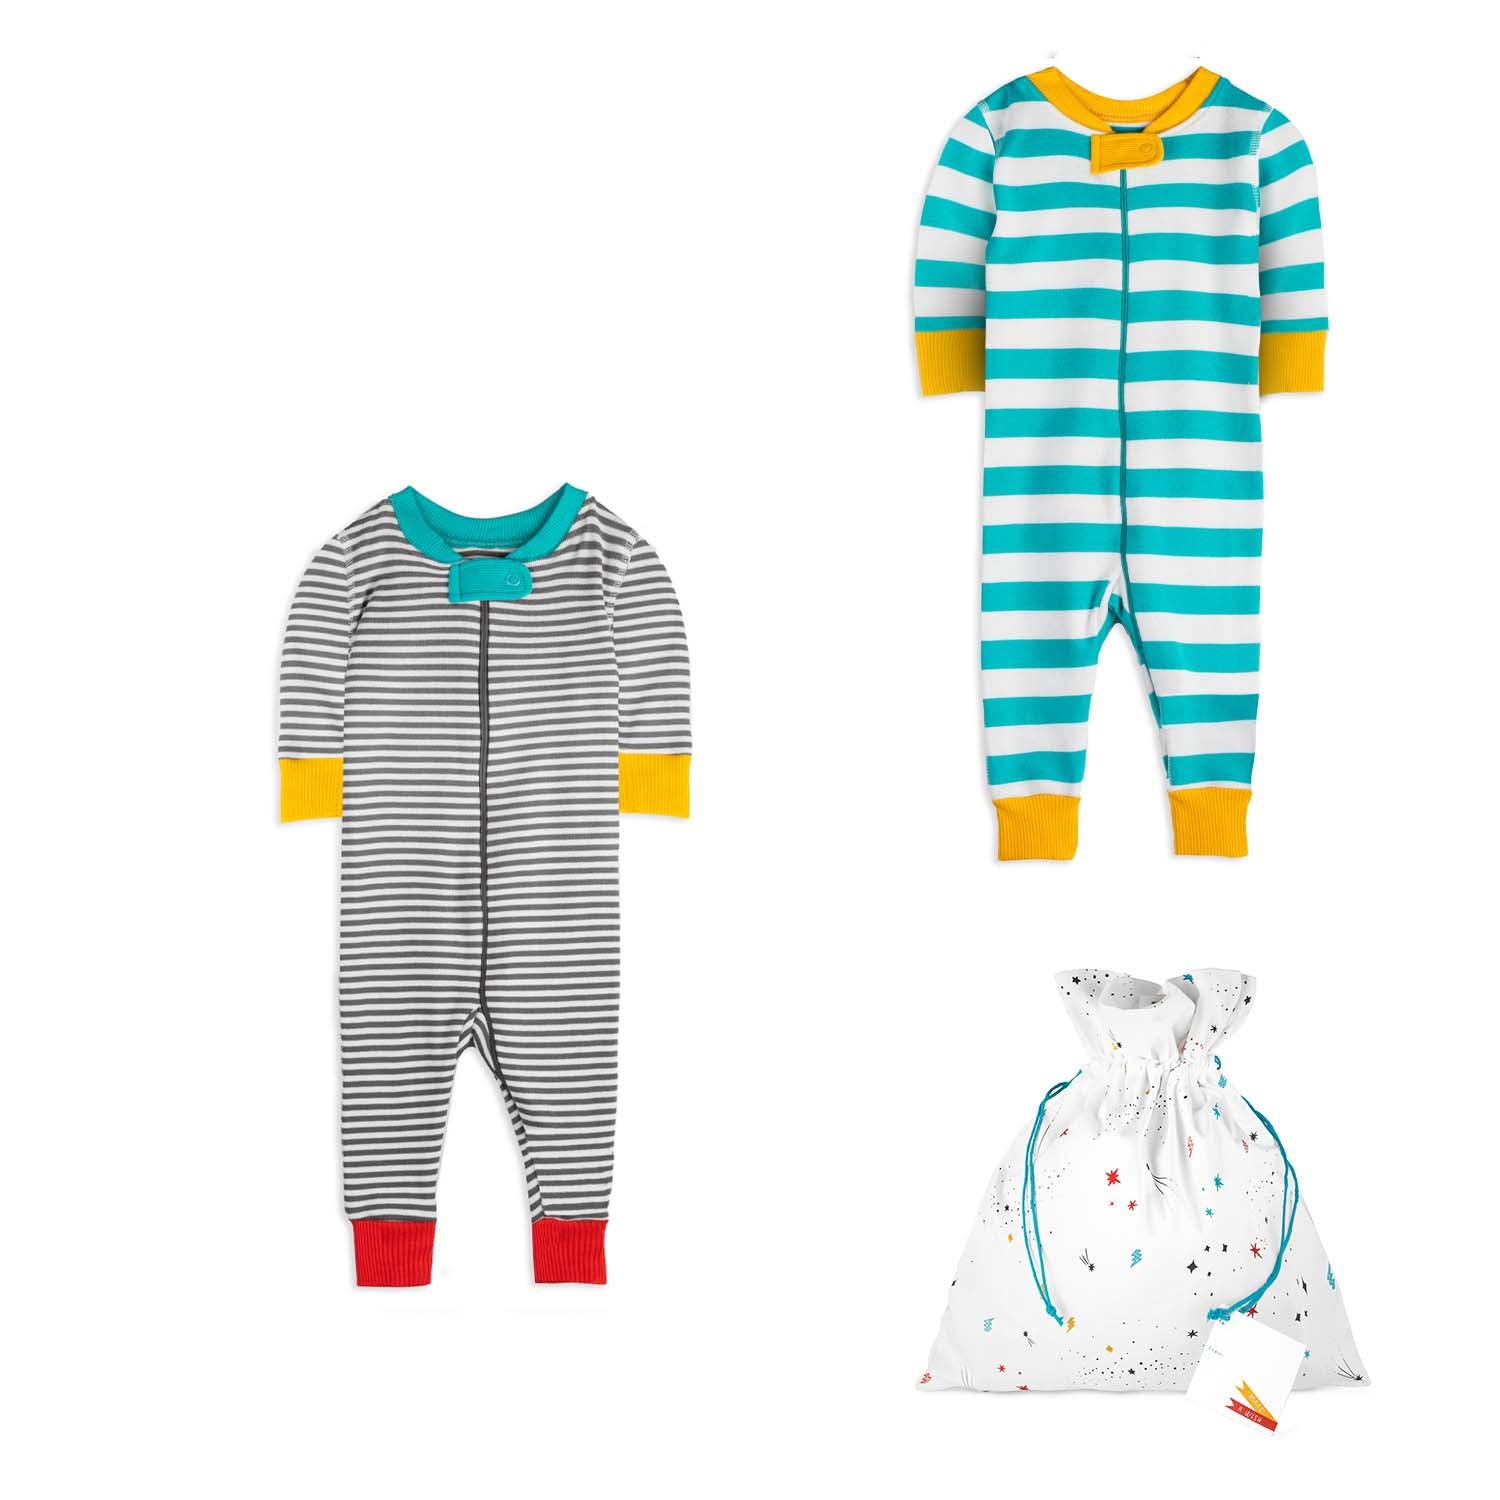 Gift Set: Two Baby Rompers with a Reusable Fabric Gift Bag